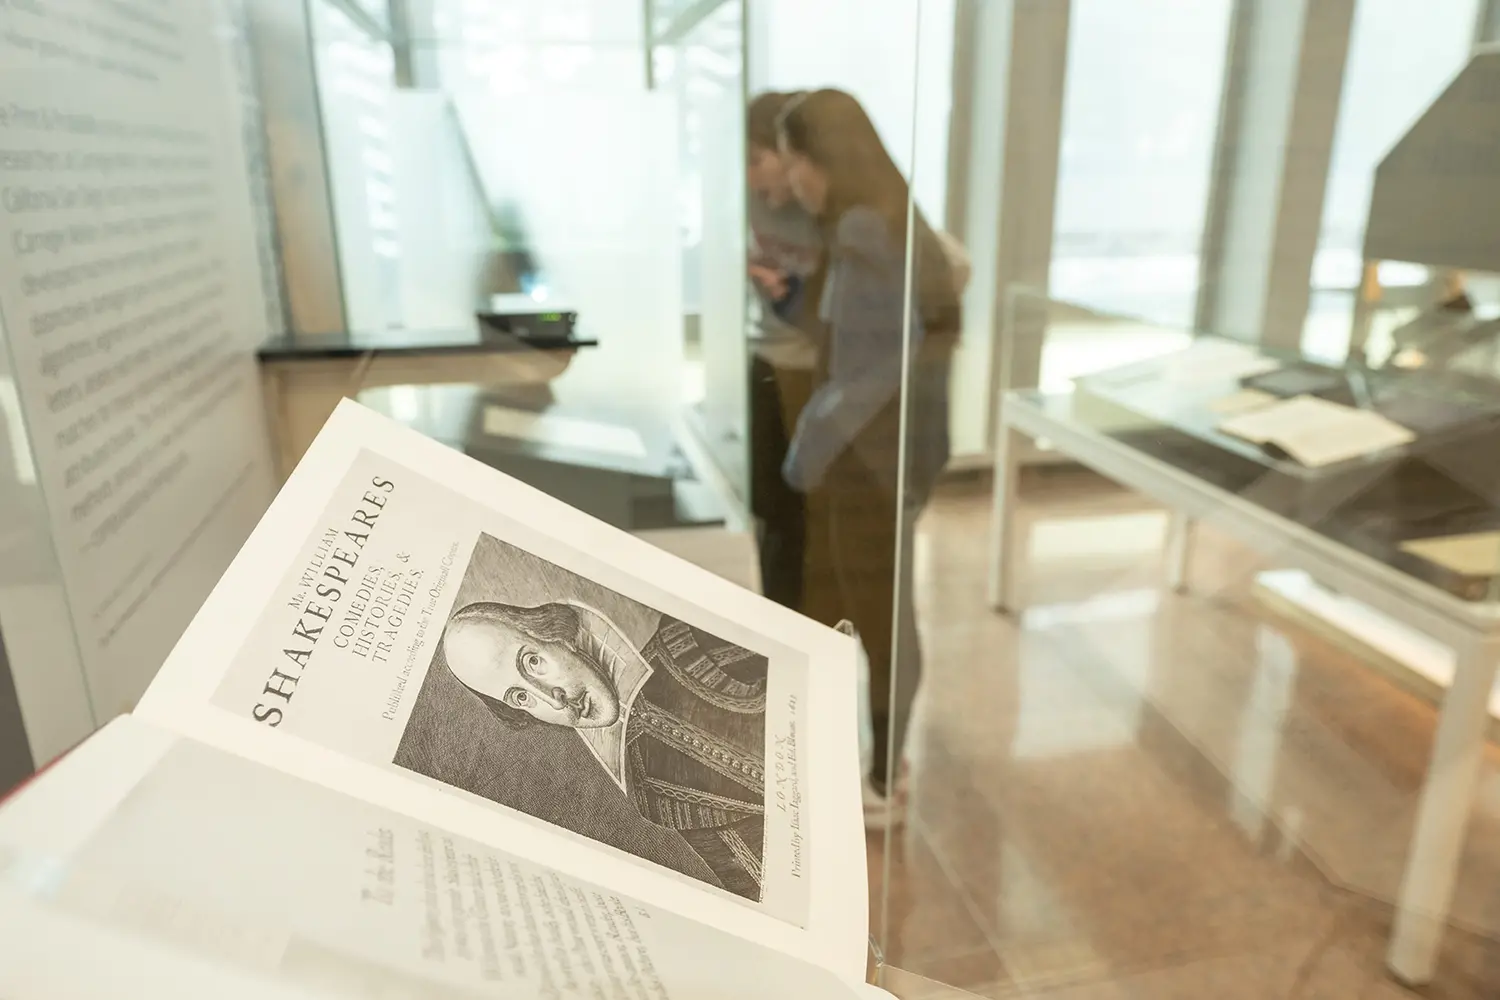 "Inventing Shakespeare: Text, Technology, and the Four Folios" exhibit